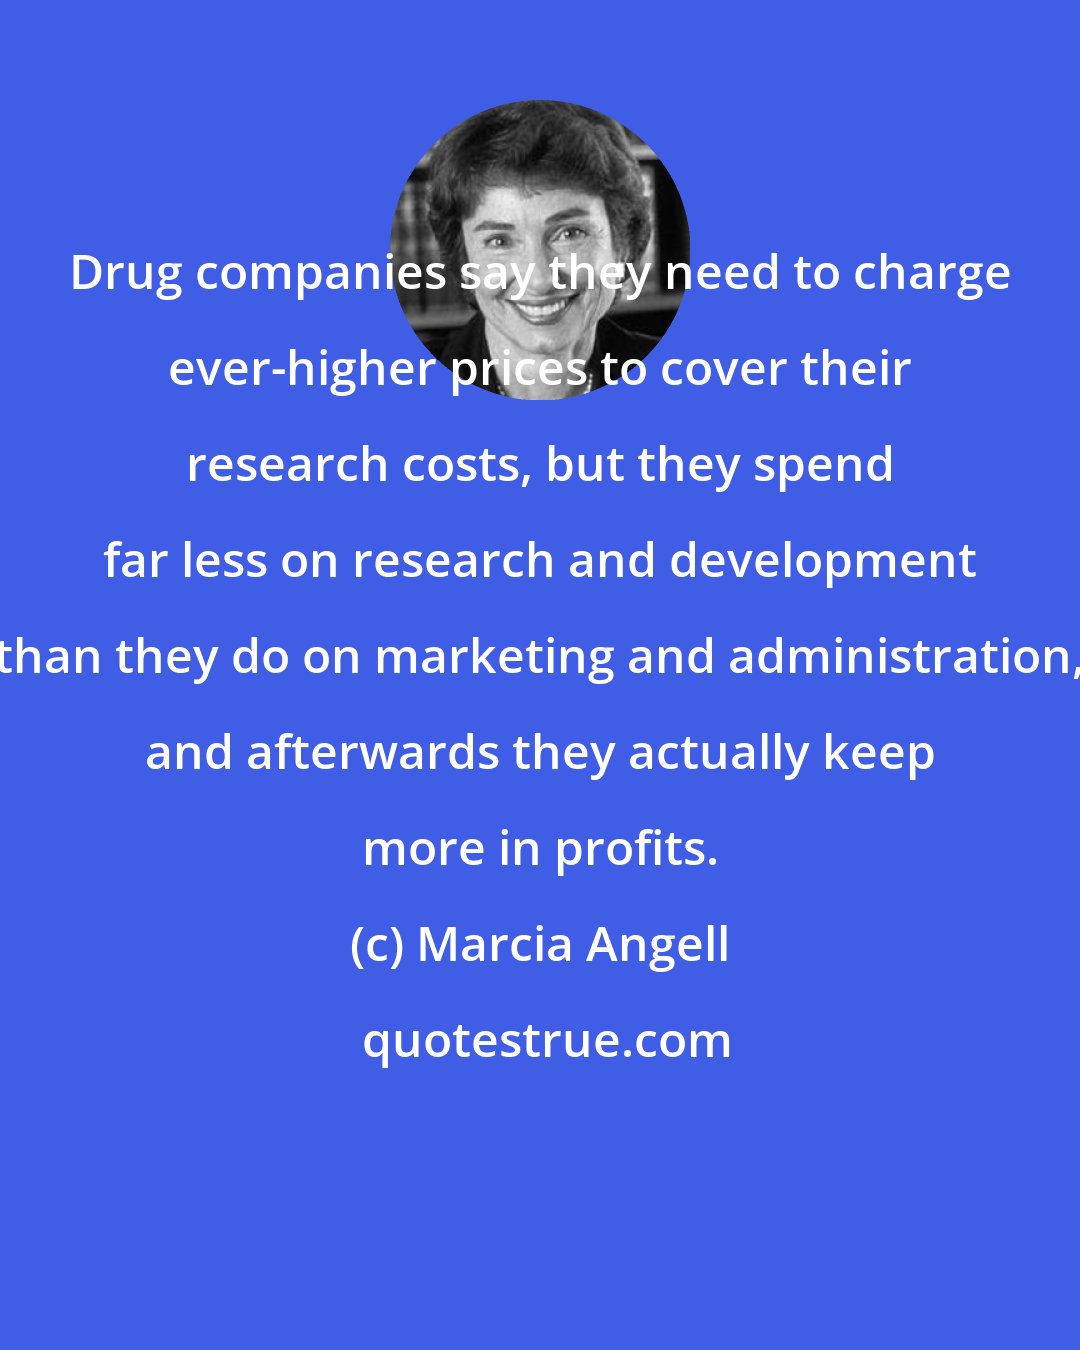 Marcia Angell: Drug companies say they need to charge ever-higher prices to cover their research costs, but they spend far less on research and development than they do on marketing and administration, and afterwards they actually keep more in profits.